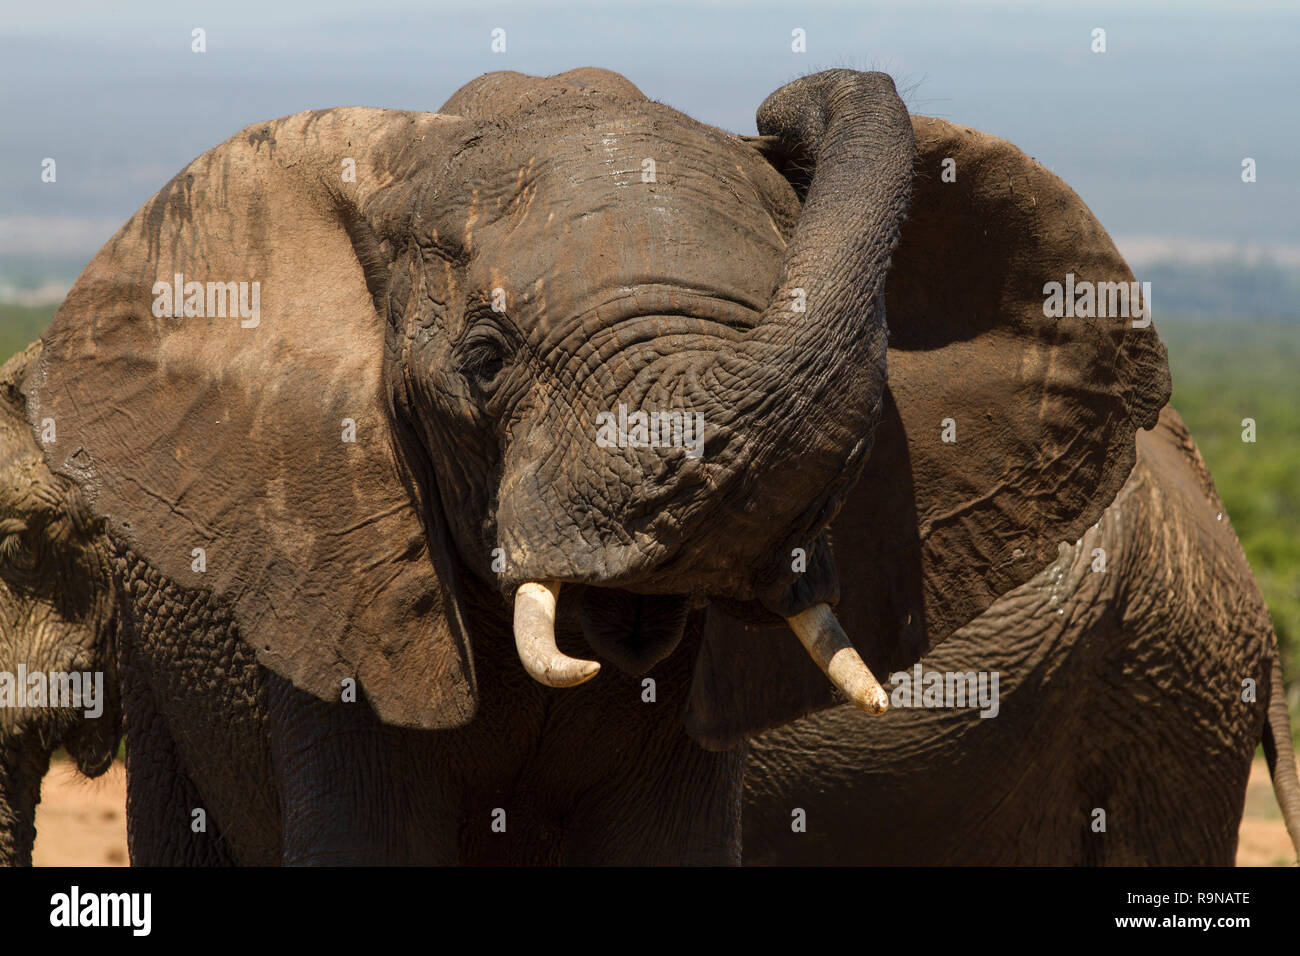 Elephant lifting his trunk above his head, Addo Elephant National Park, South Africa Stock Photo